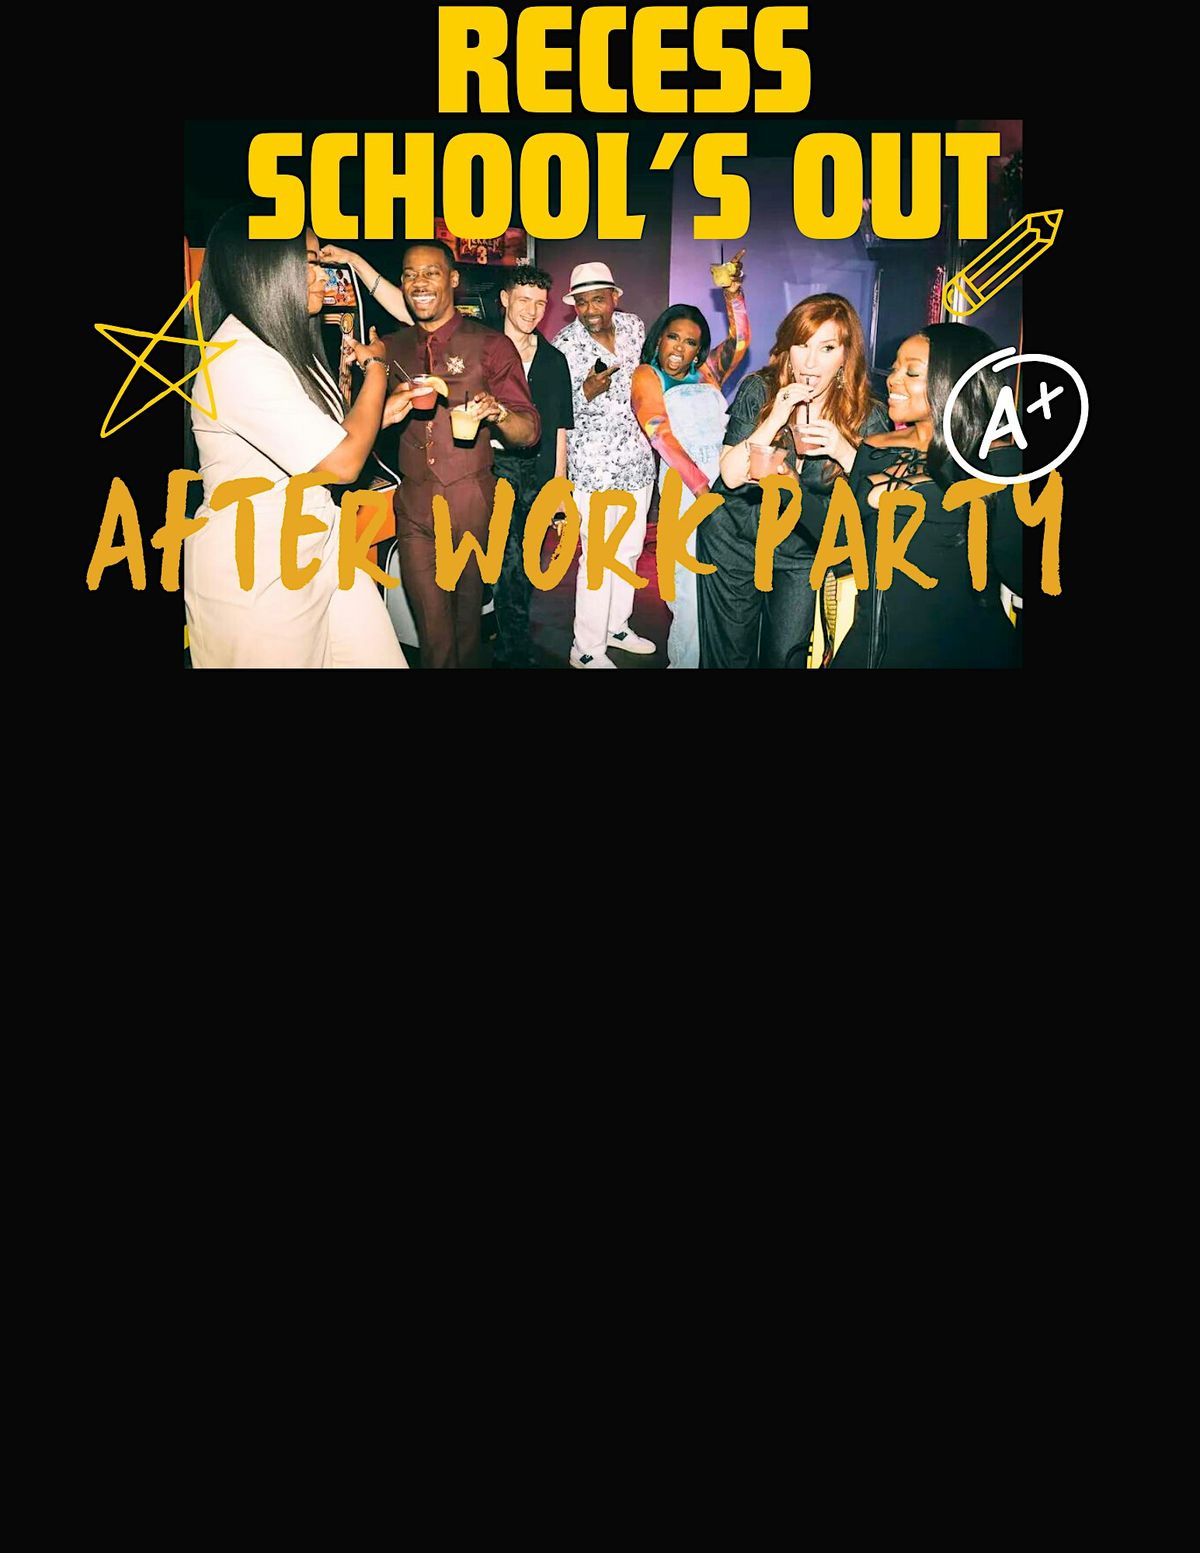 "Recess" Schools Out After Work Party